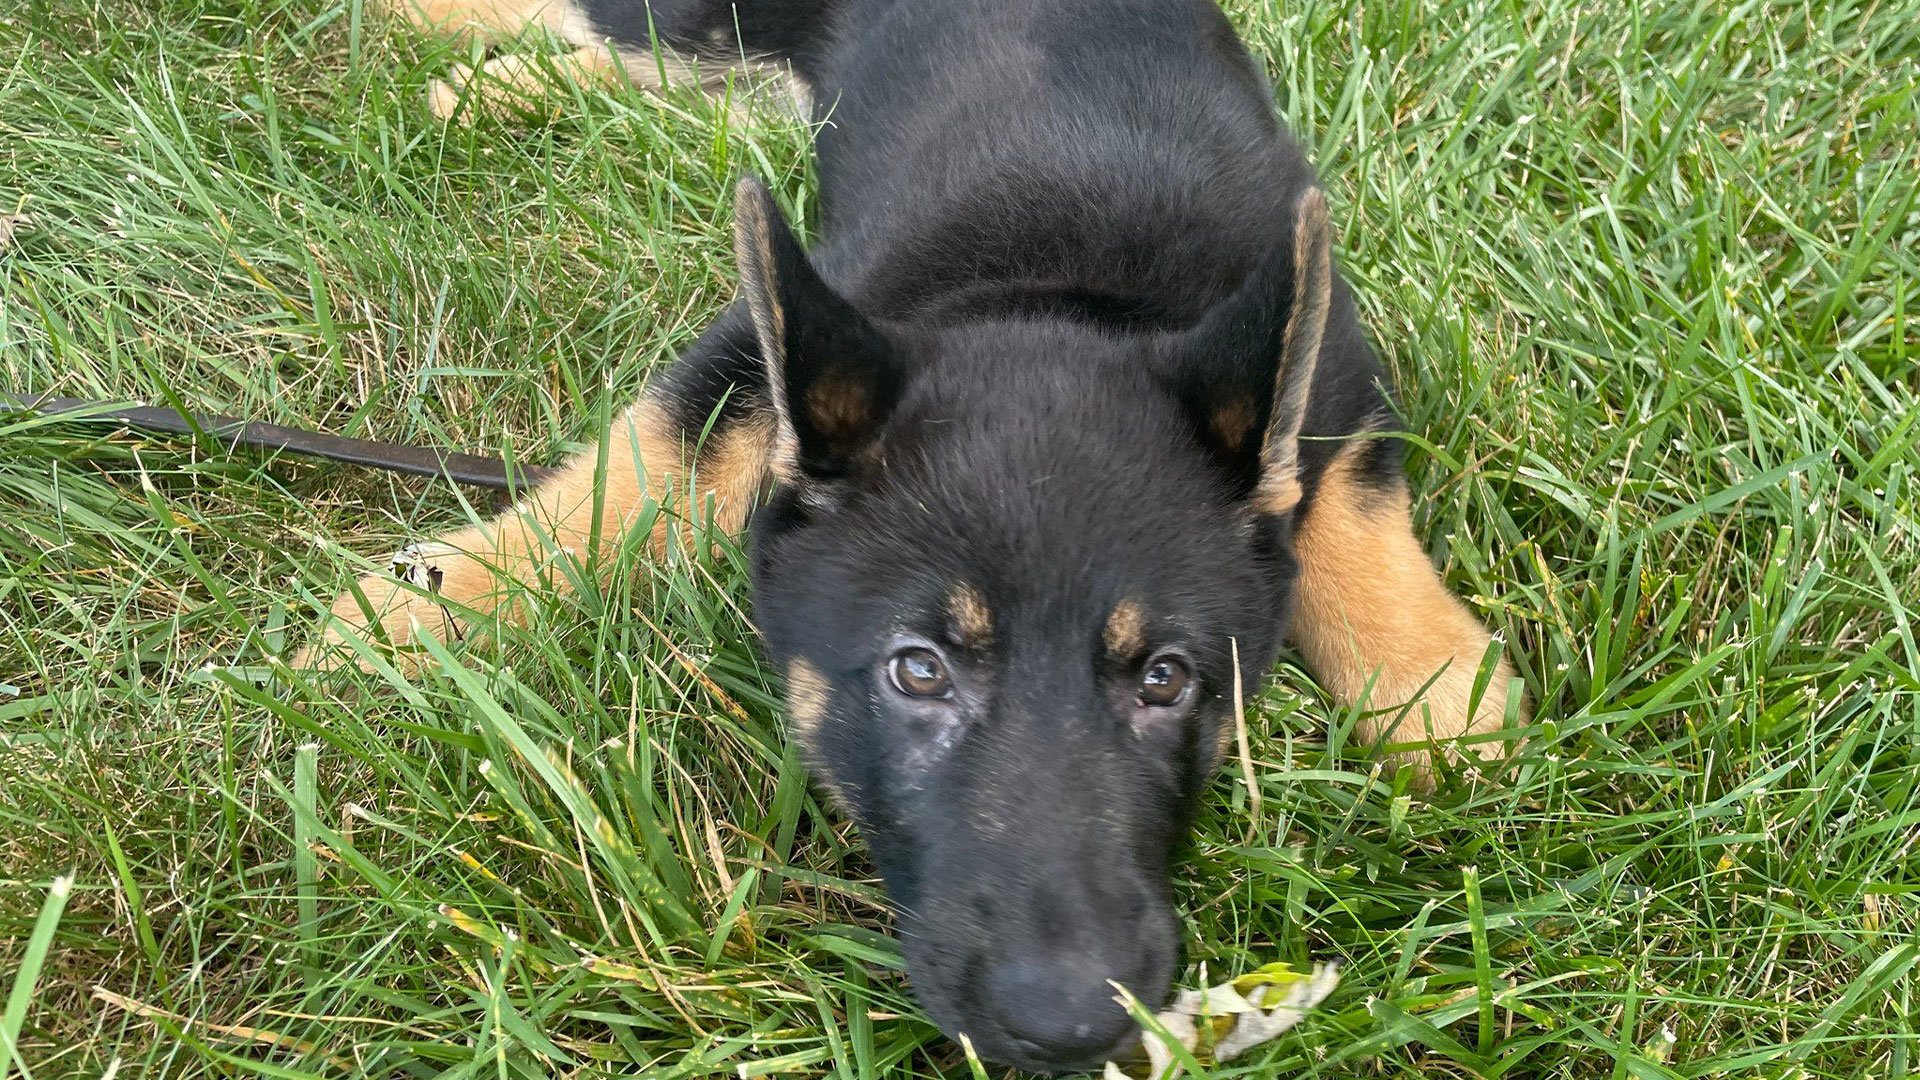 Griff, the newest member of the Union County Sheriff's Office in North Carolina, awaits his assignment and training. Griff was donated to the department by Kaw-Tal German Shepherds and named by a public vote. Union County Sheriff's Office photo.